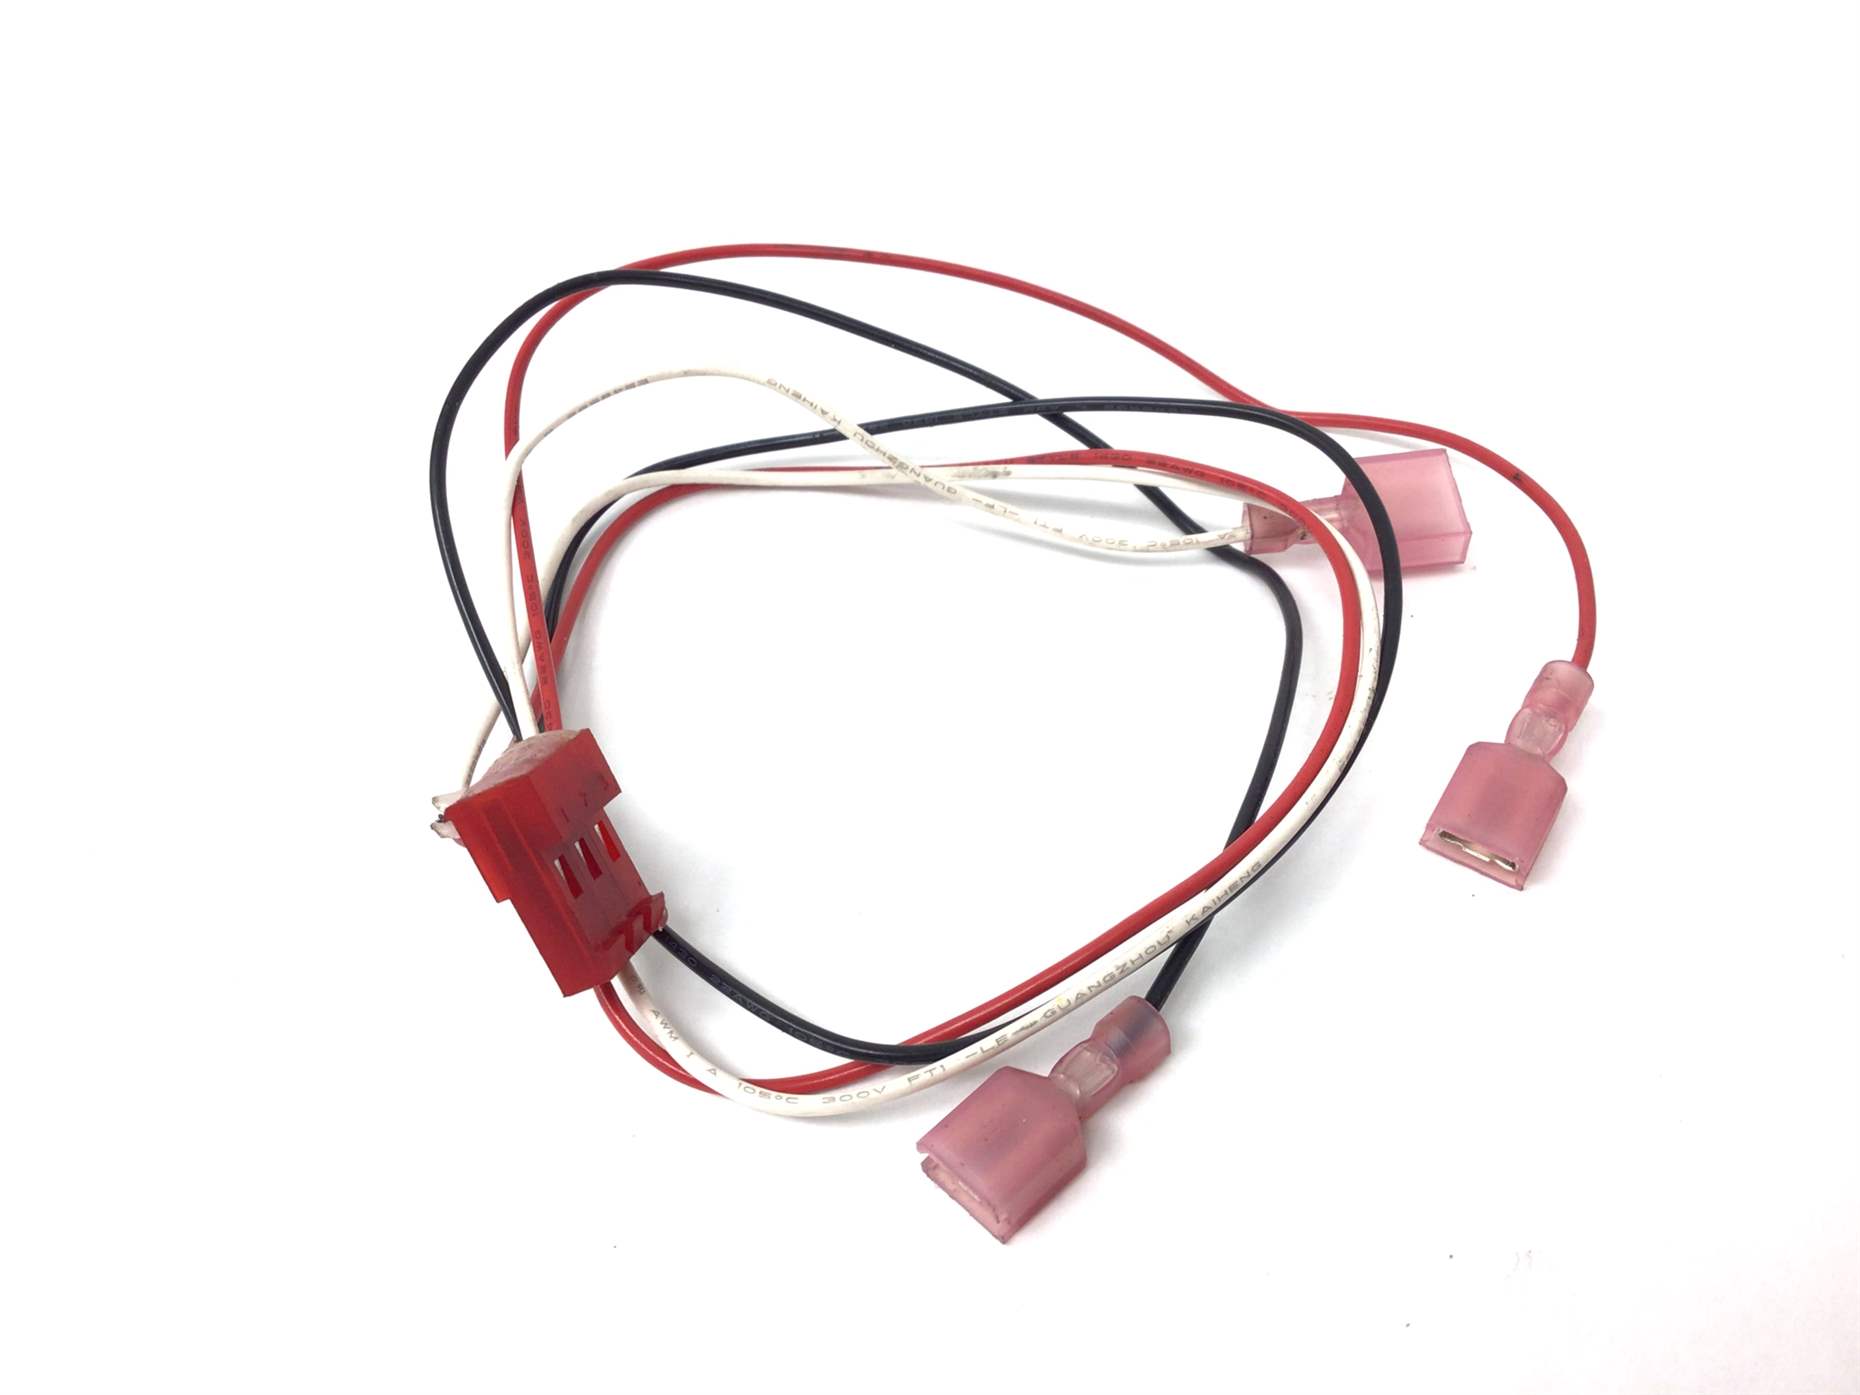 Lift Motor Wire Harness (Used)